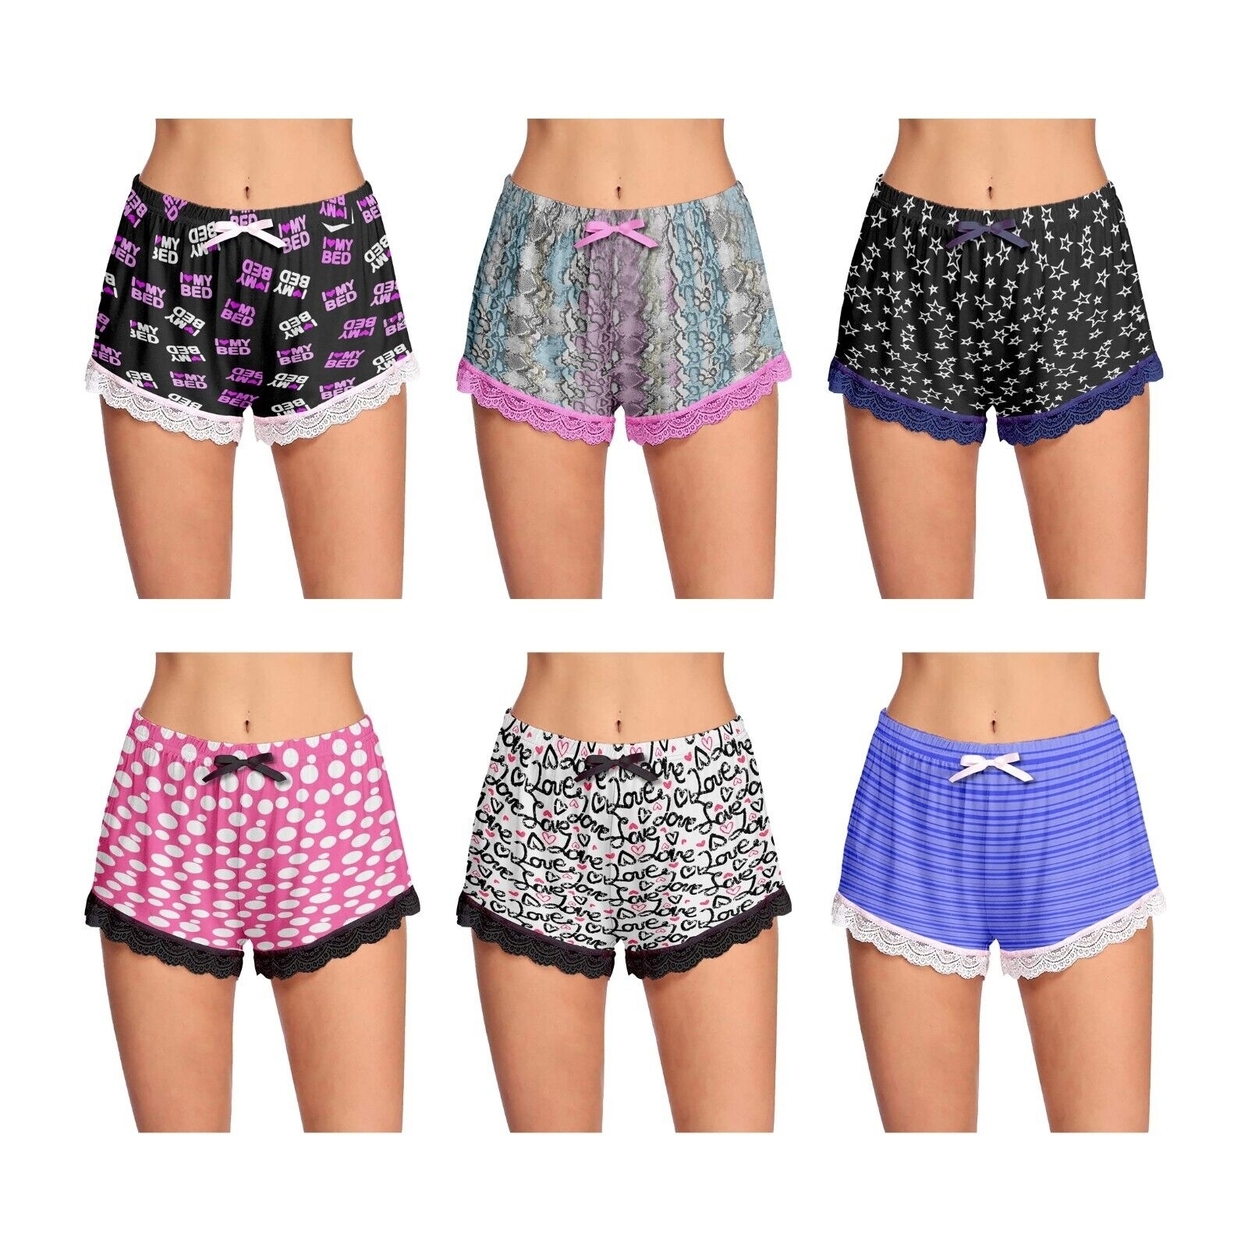 2-Pack: Women's Ultra-Soft Cozy Fun Printed Lace Trim Pajama Lounge Shorts - X-large, Shapes